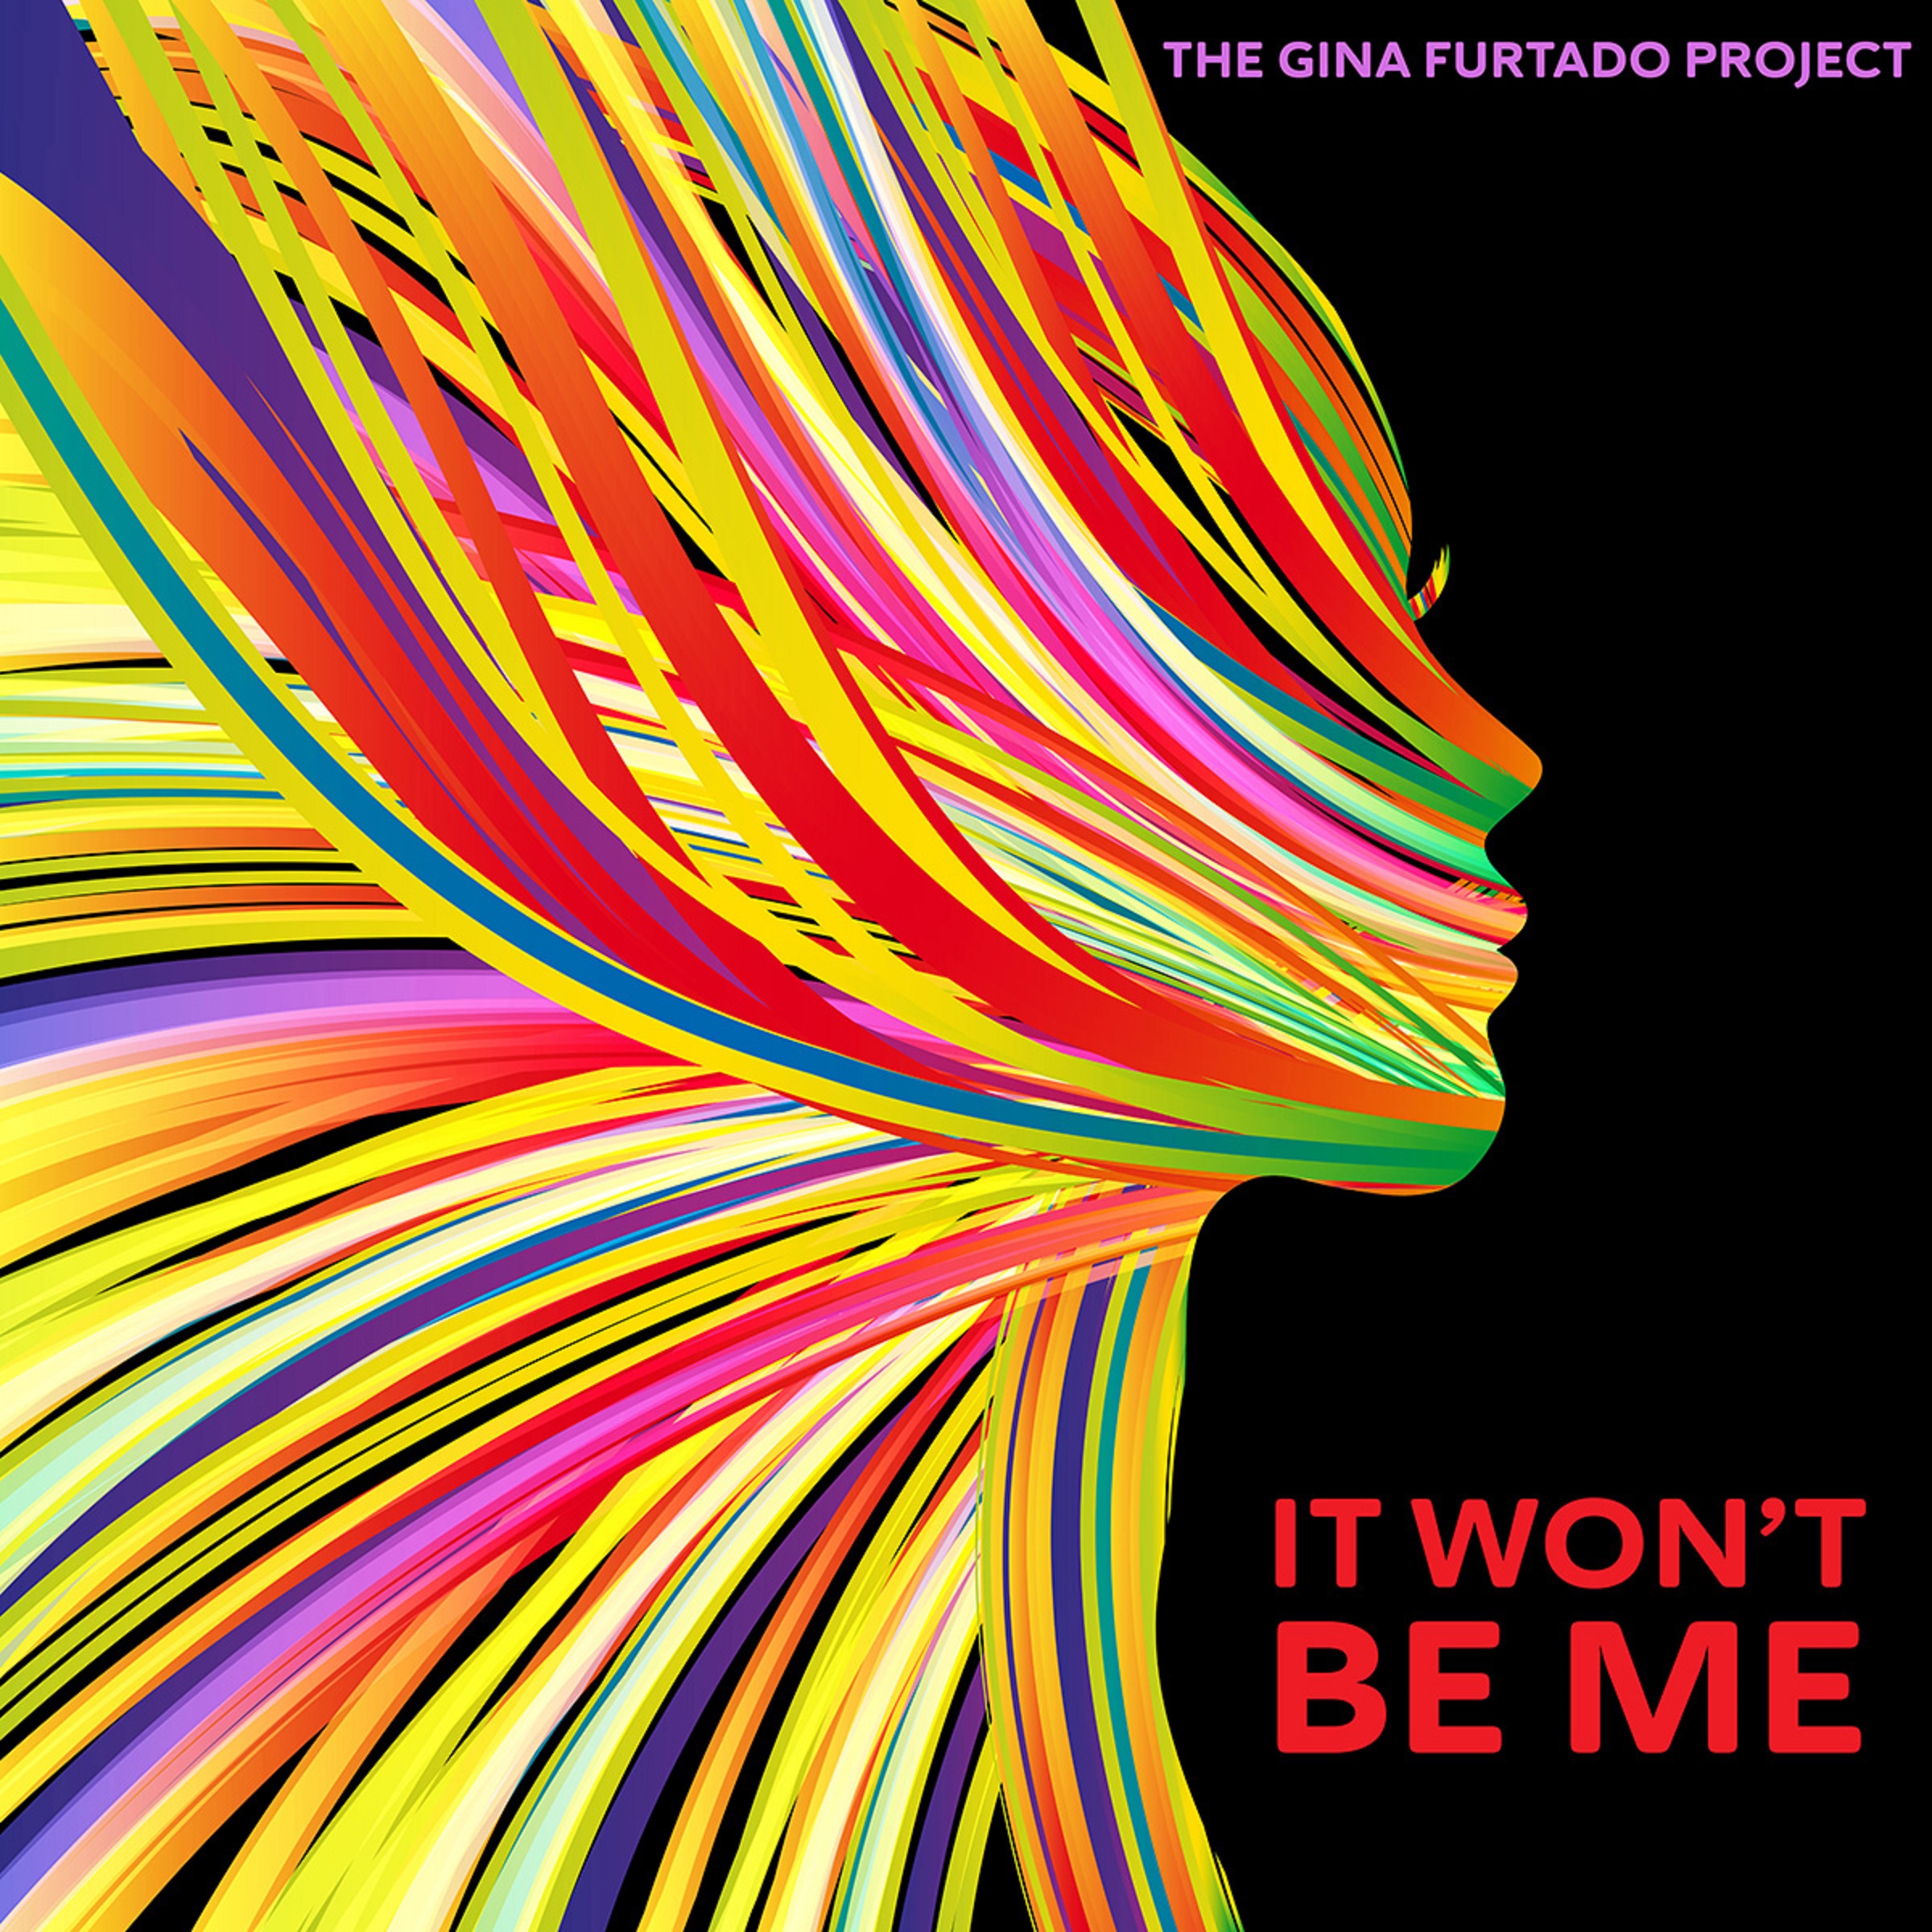 The Gina Furtado Project makes a powerful declaration with “It Won’t Be Me”